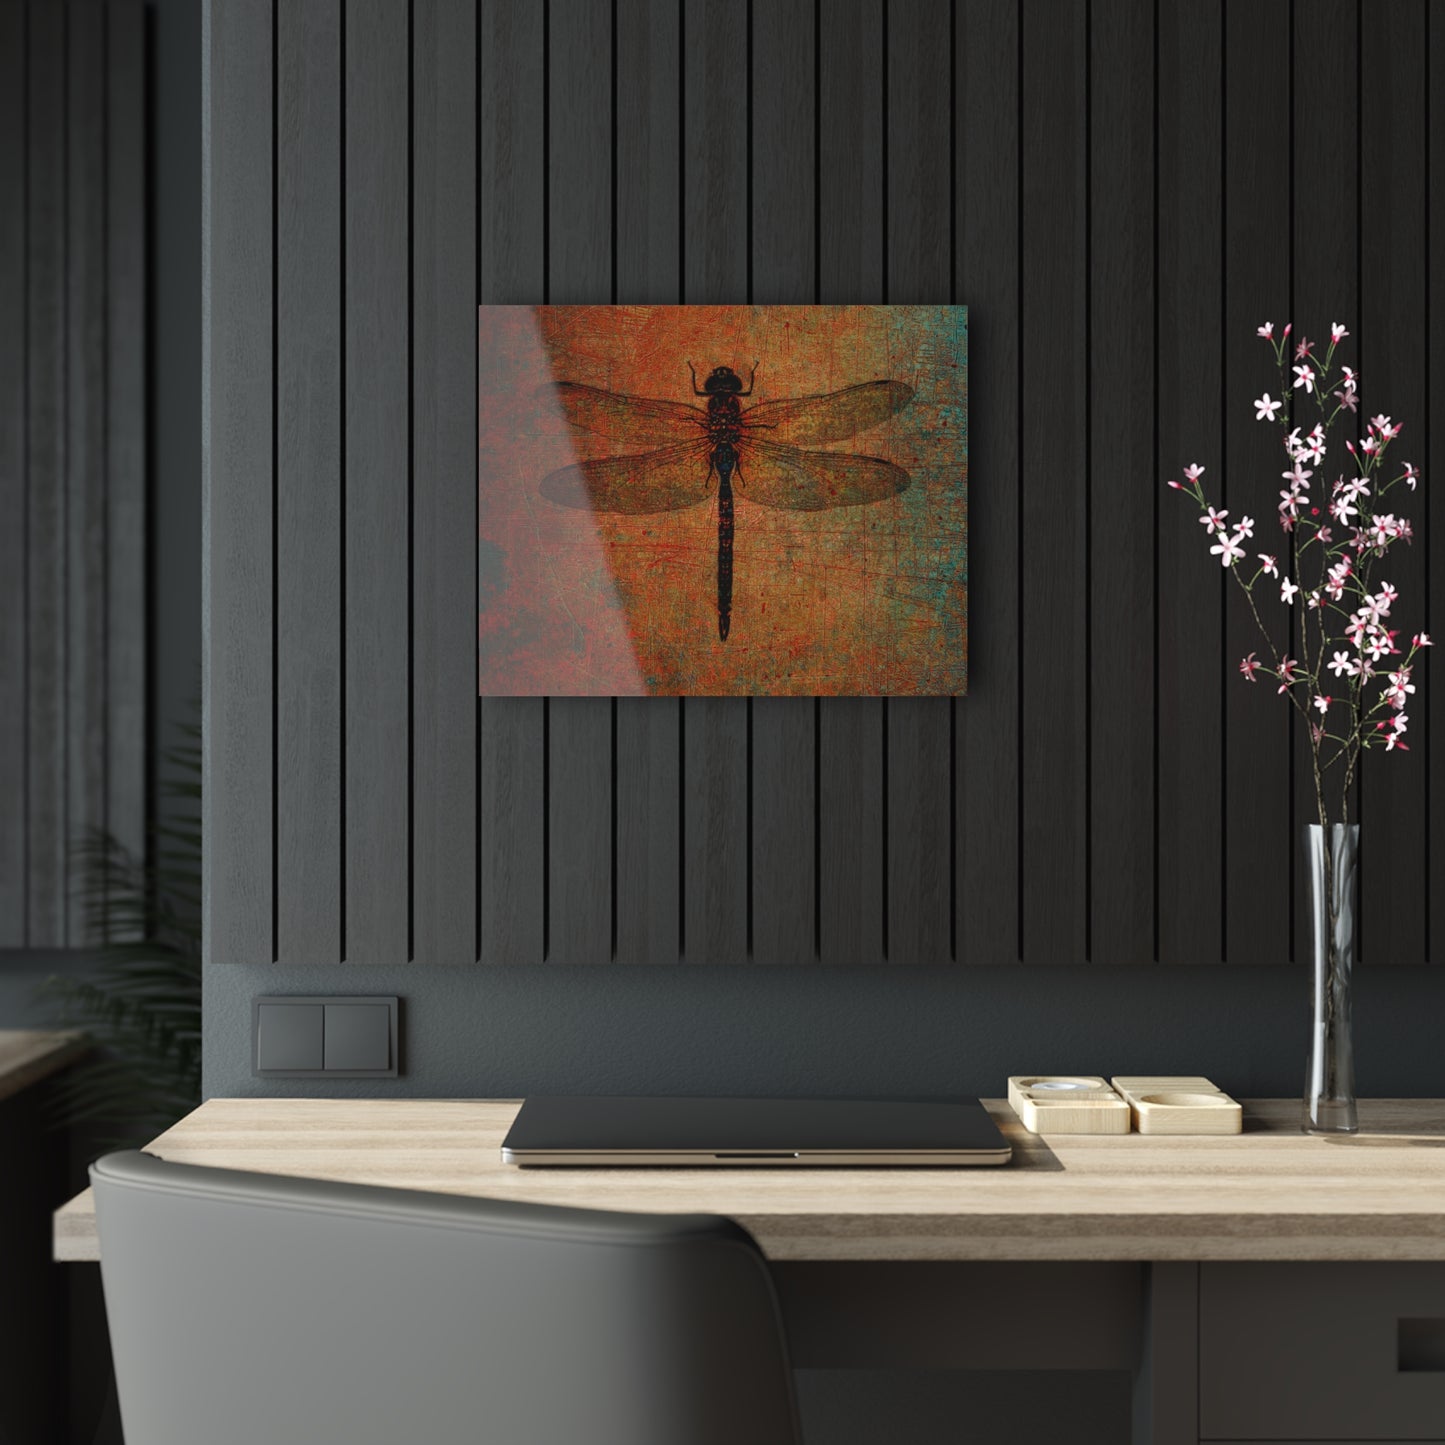 Dragonfly on Distressed Brown Stone Background on a Crystal Clear Acrylic Panel 20x16 hung on dark wall